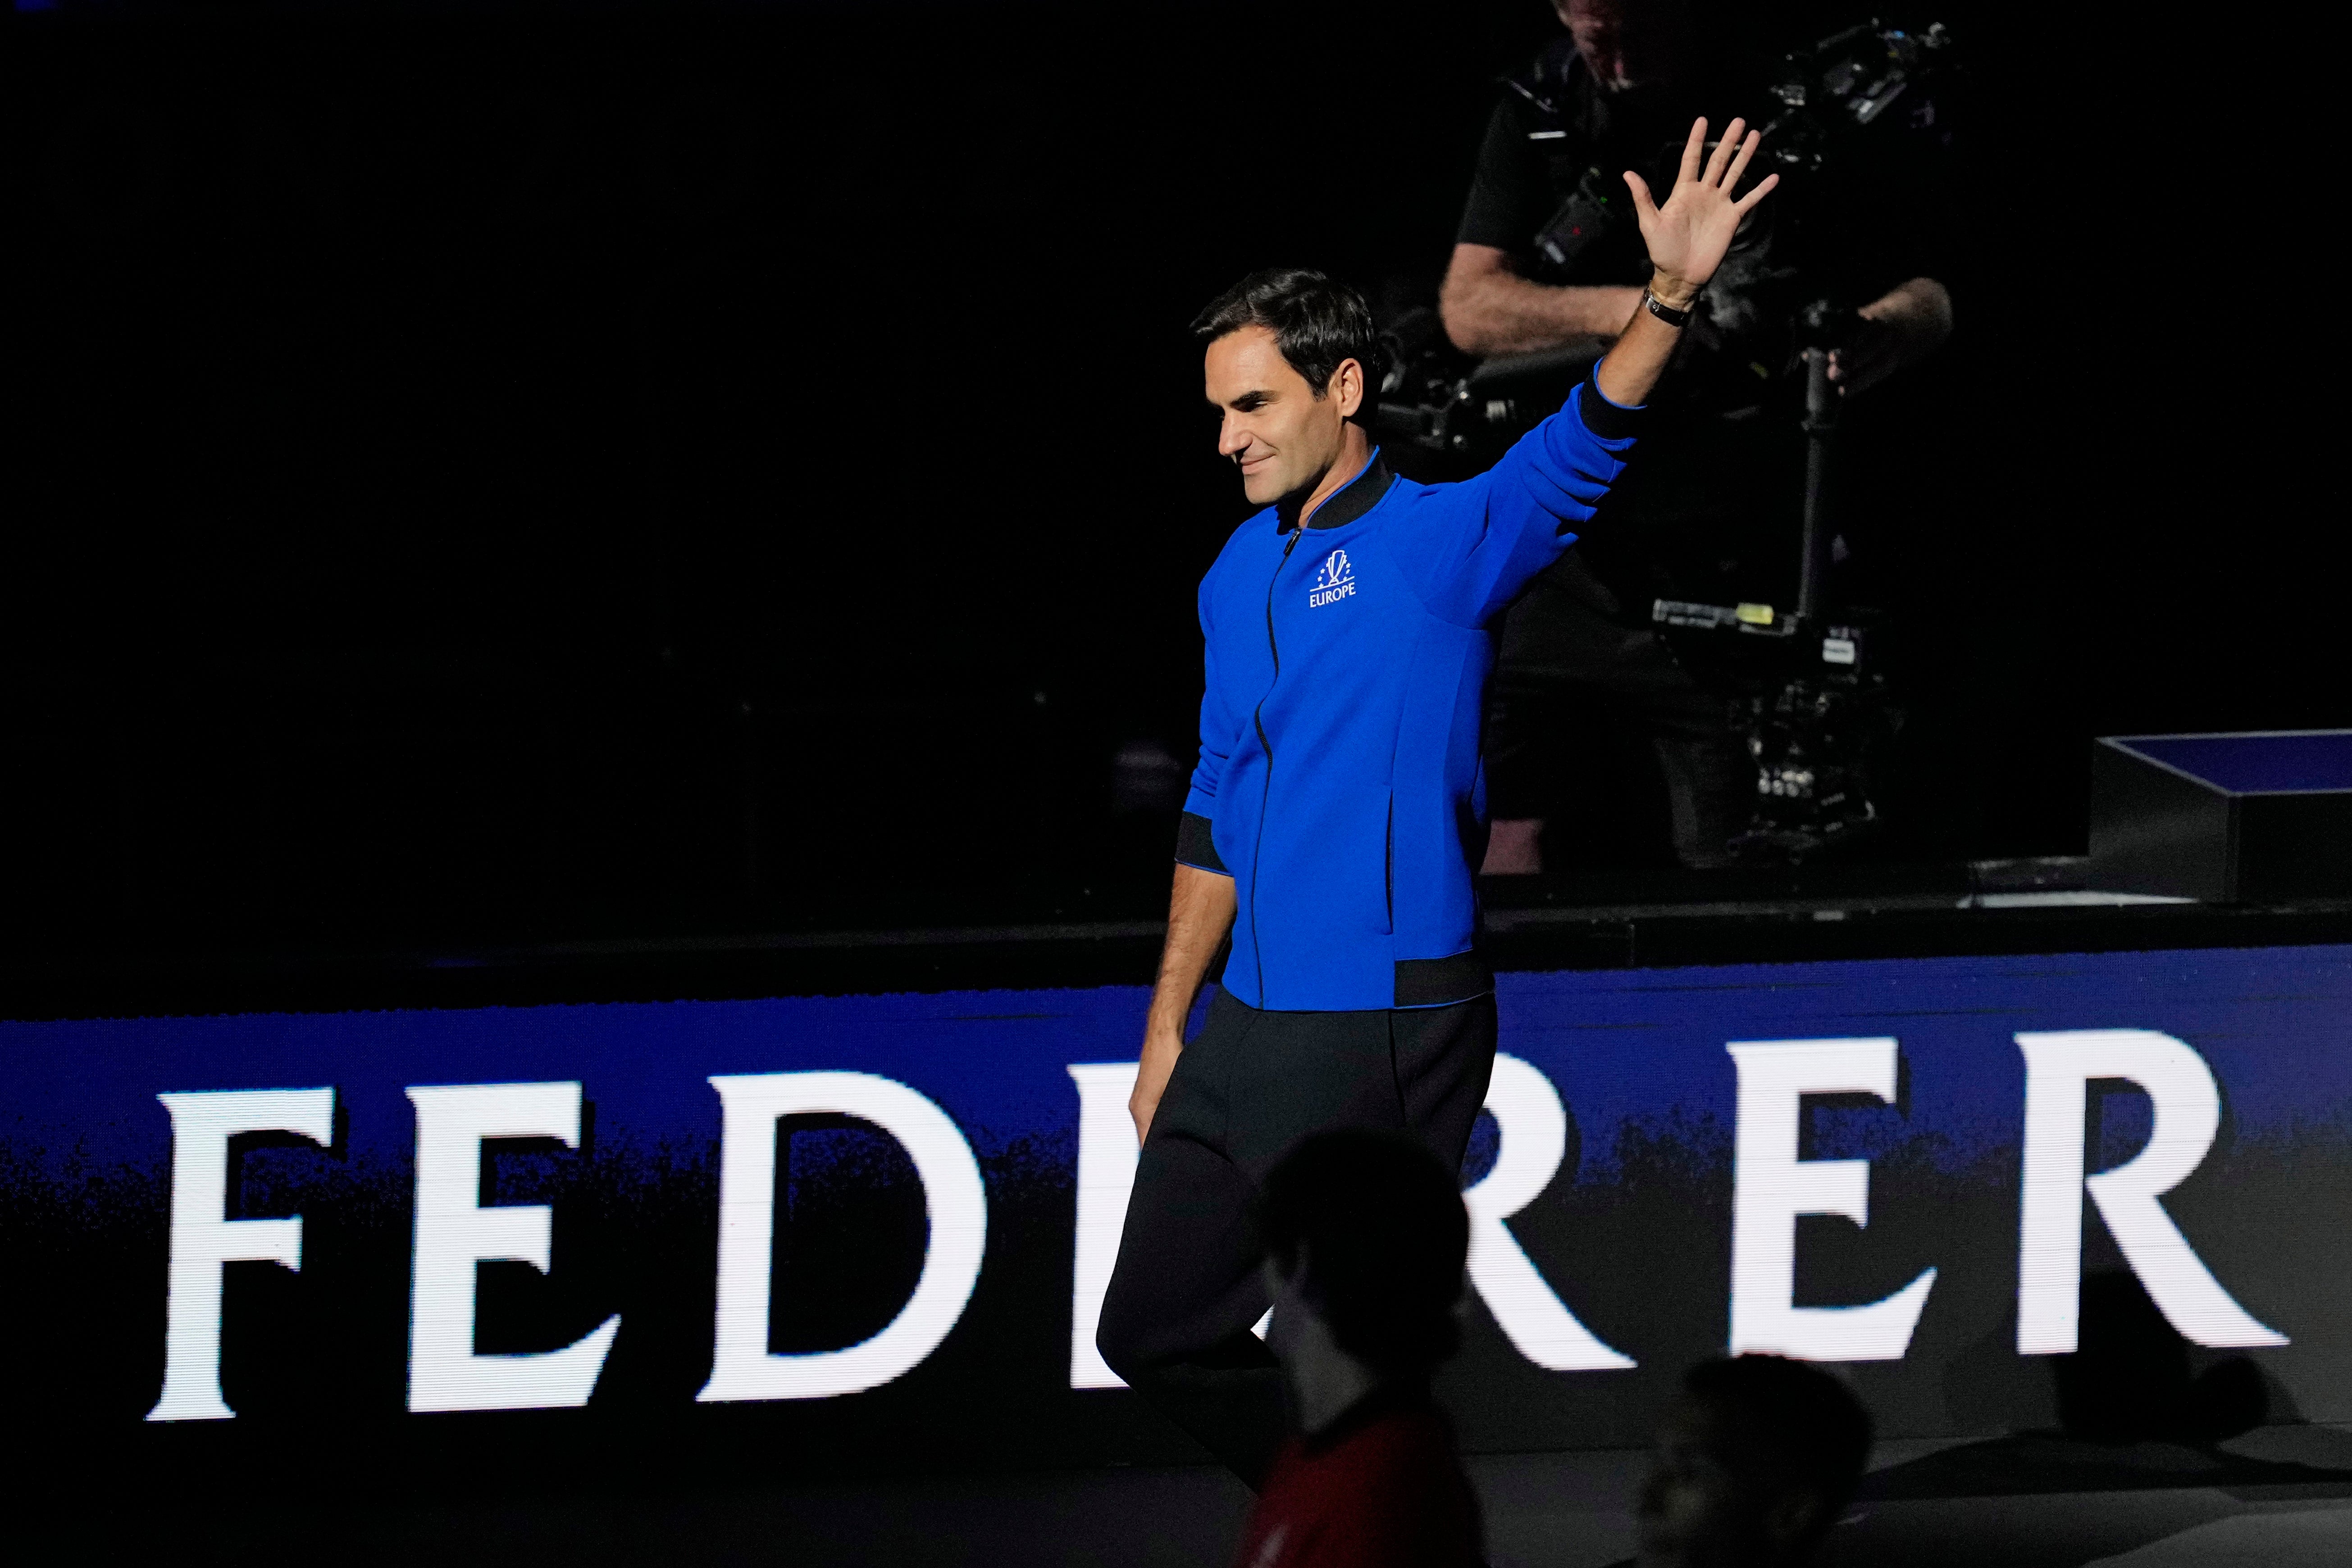 Roger Federer bids farewell in last match before retirement The Independent